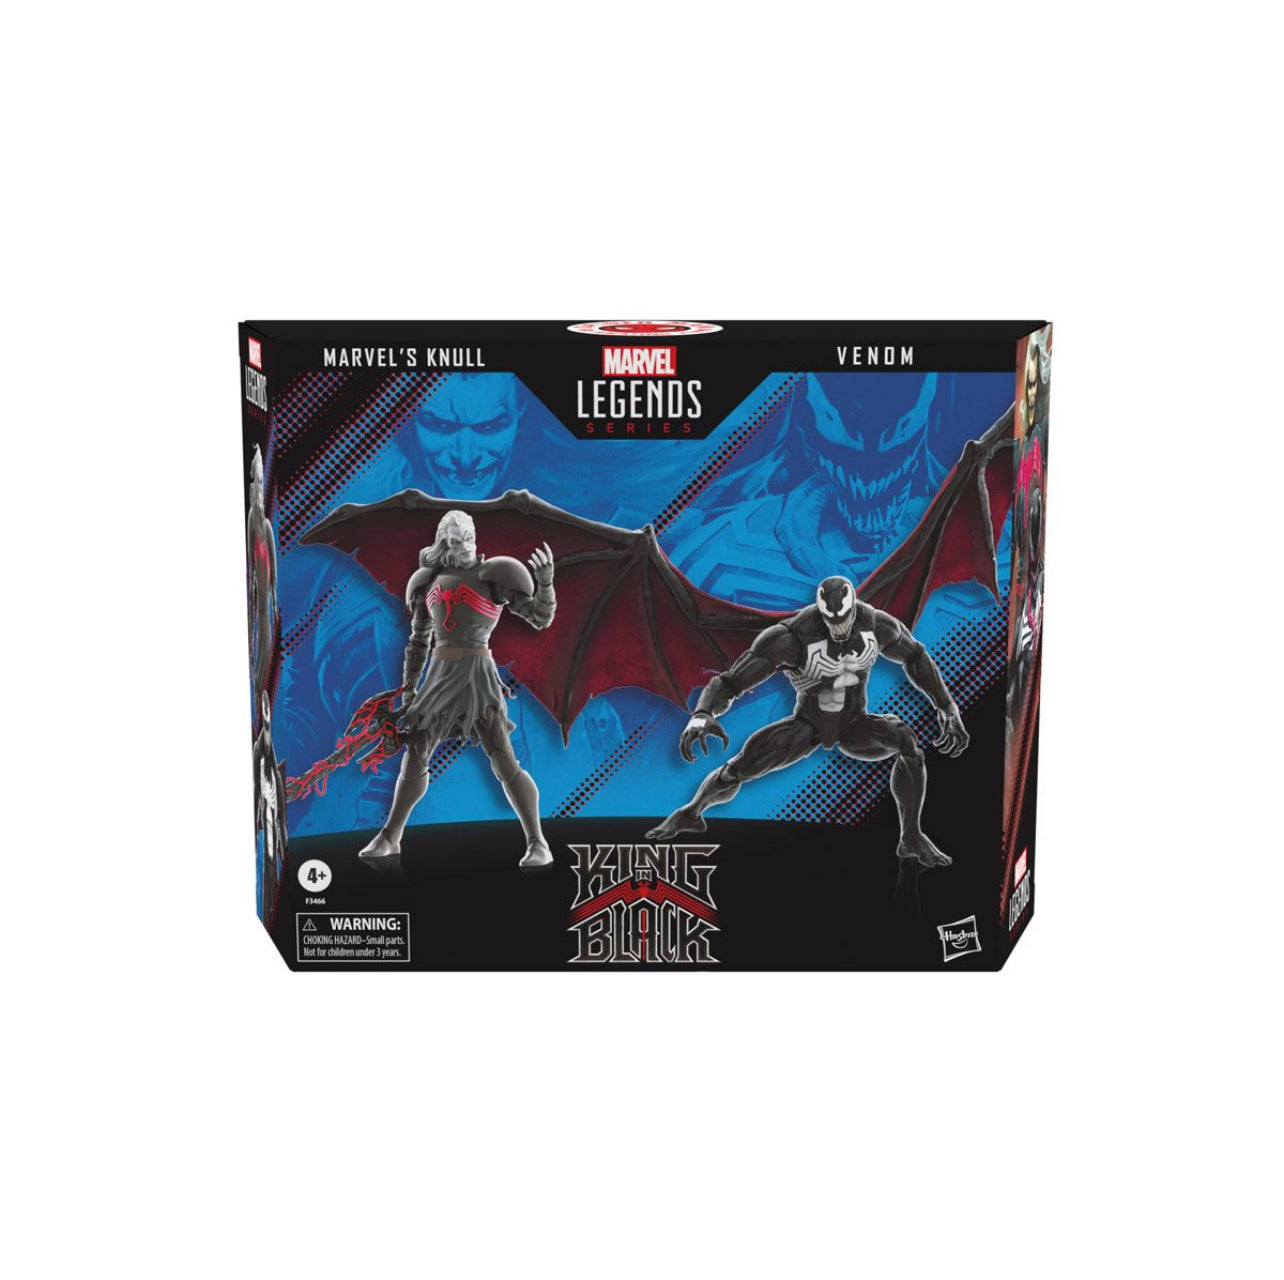 spider man unlimited toys